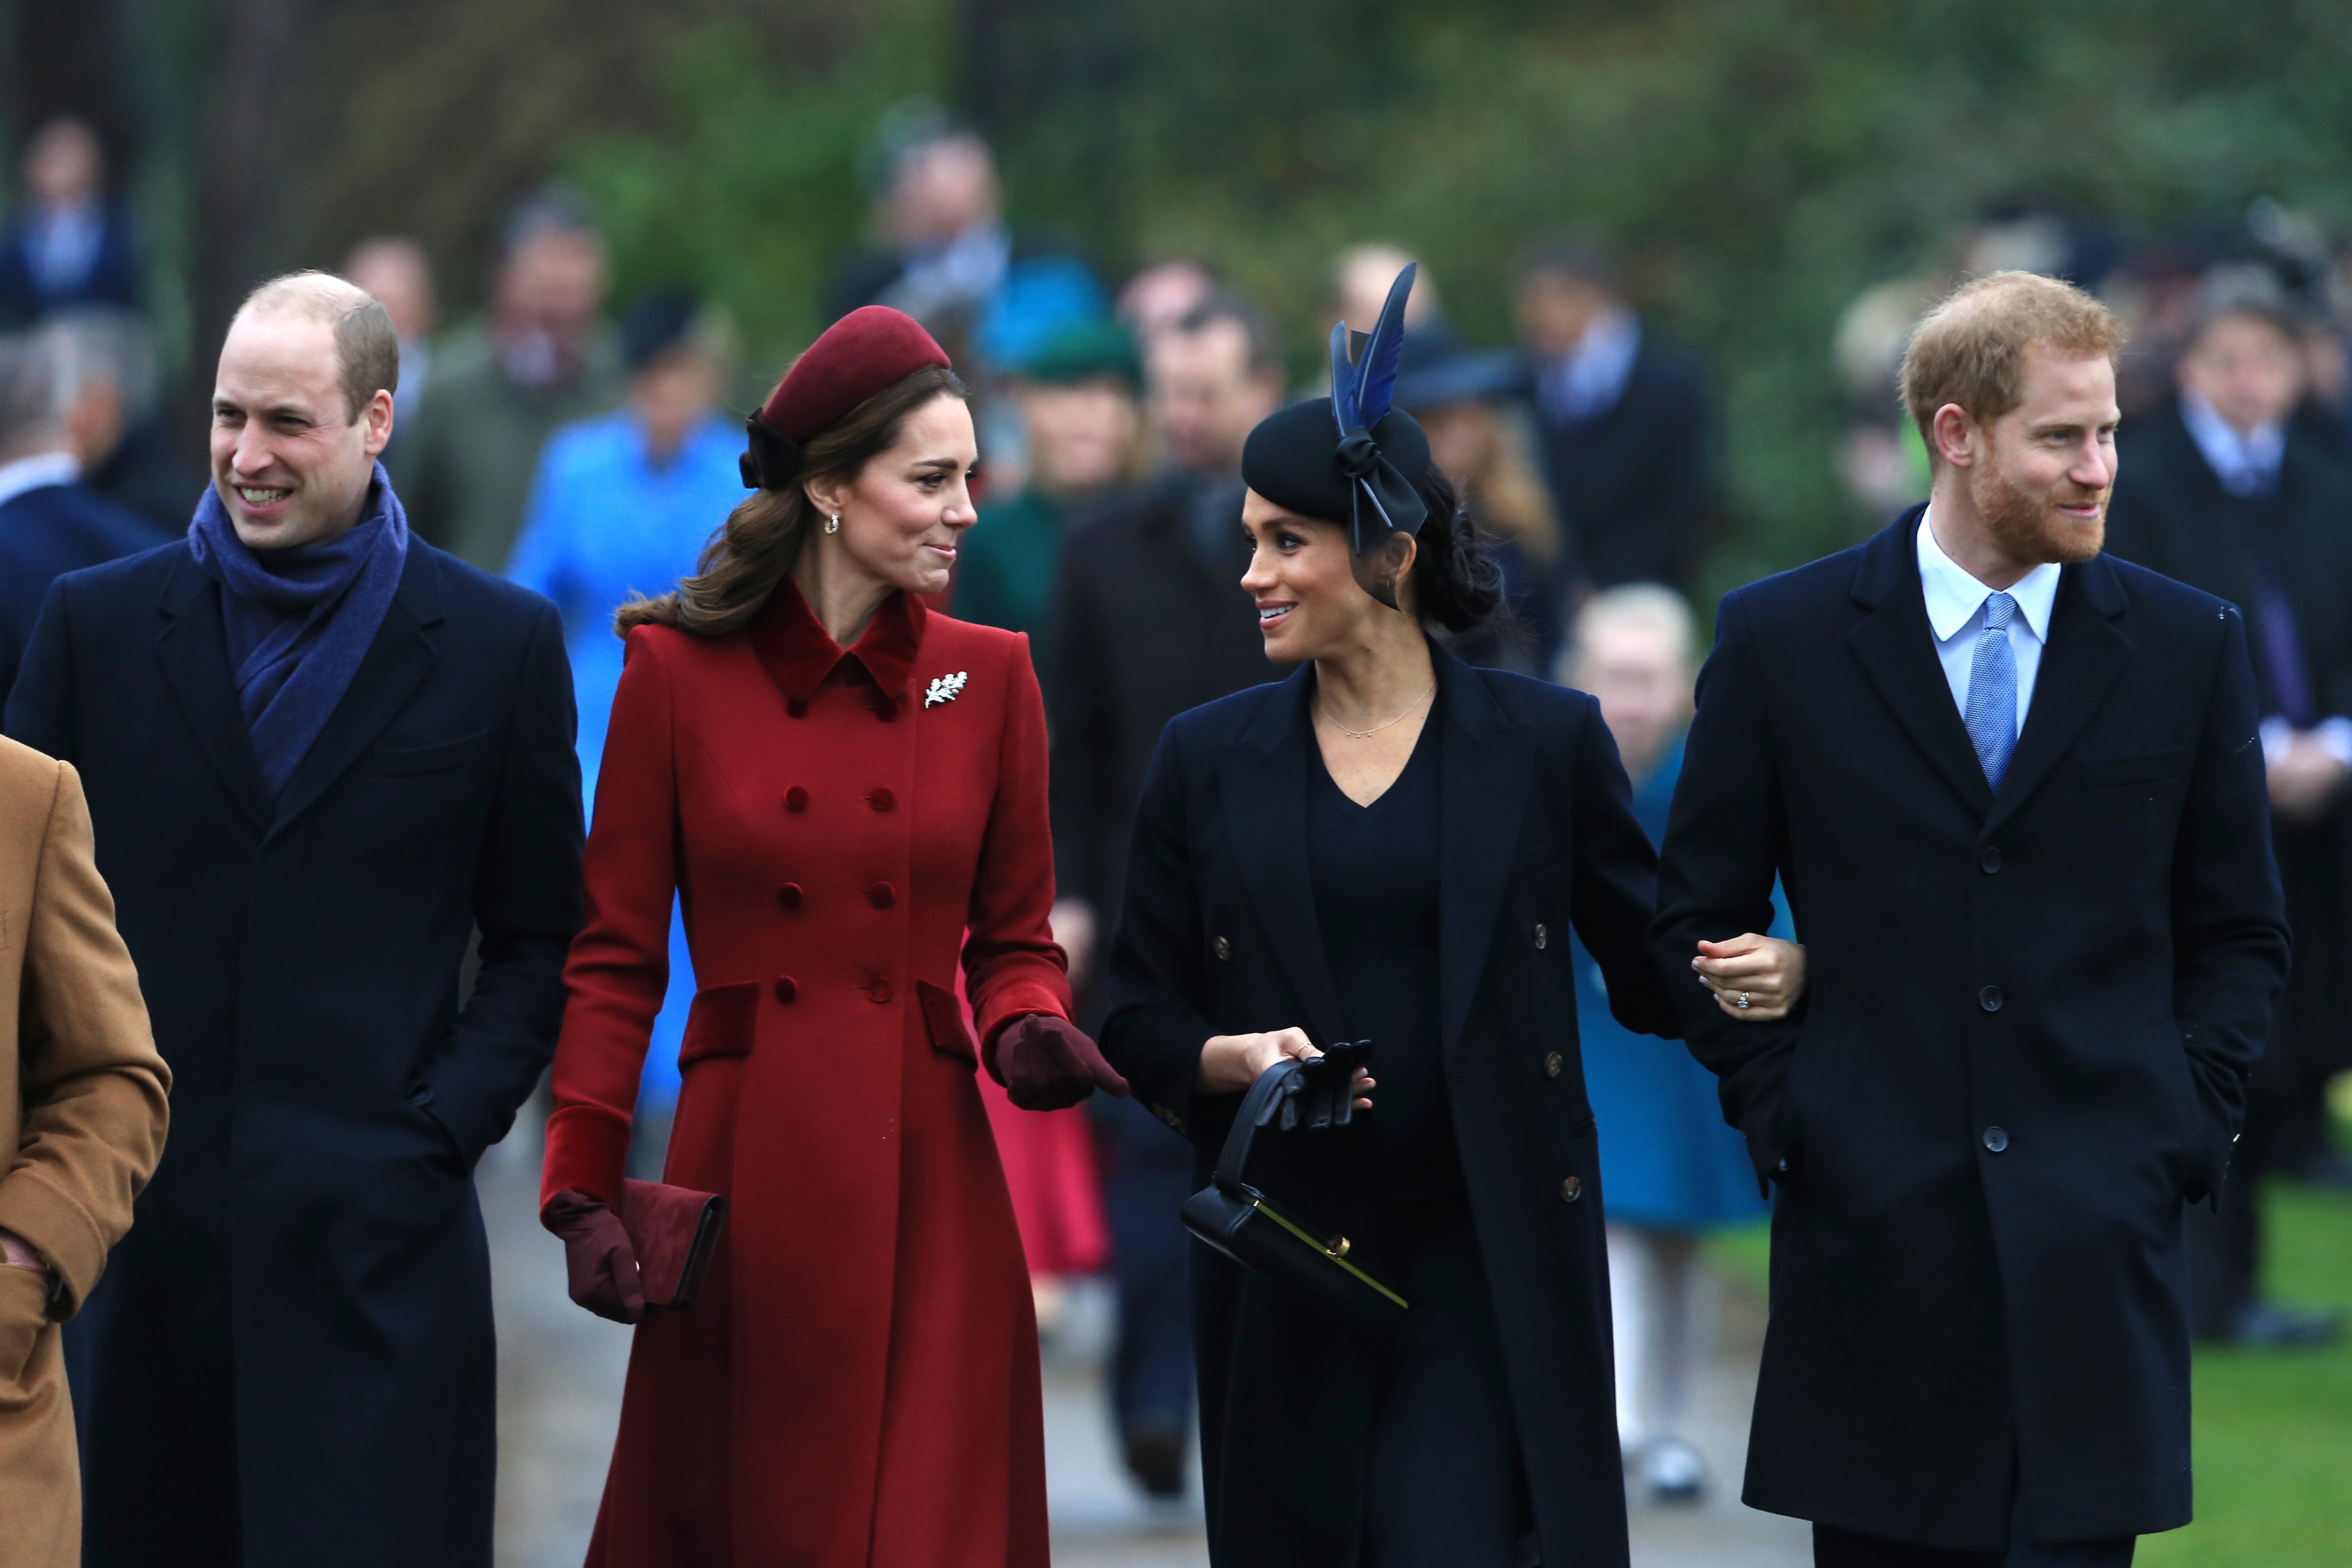 Prince William, Kate Middleton, Meghan Markle, and Prince Harry pictured arriving to attend Christmas Day Church service at Church of St Mary Magdalene on the Sandringham estate on December 25, 2018 in King's Lynn, England. / Source: Getty Images